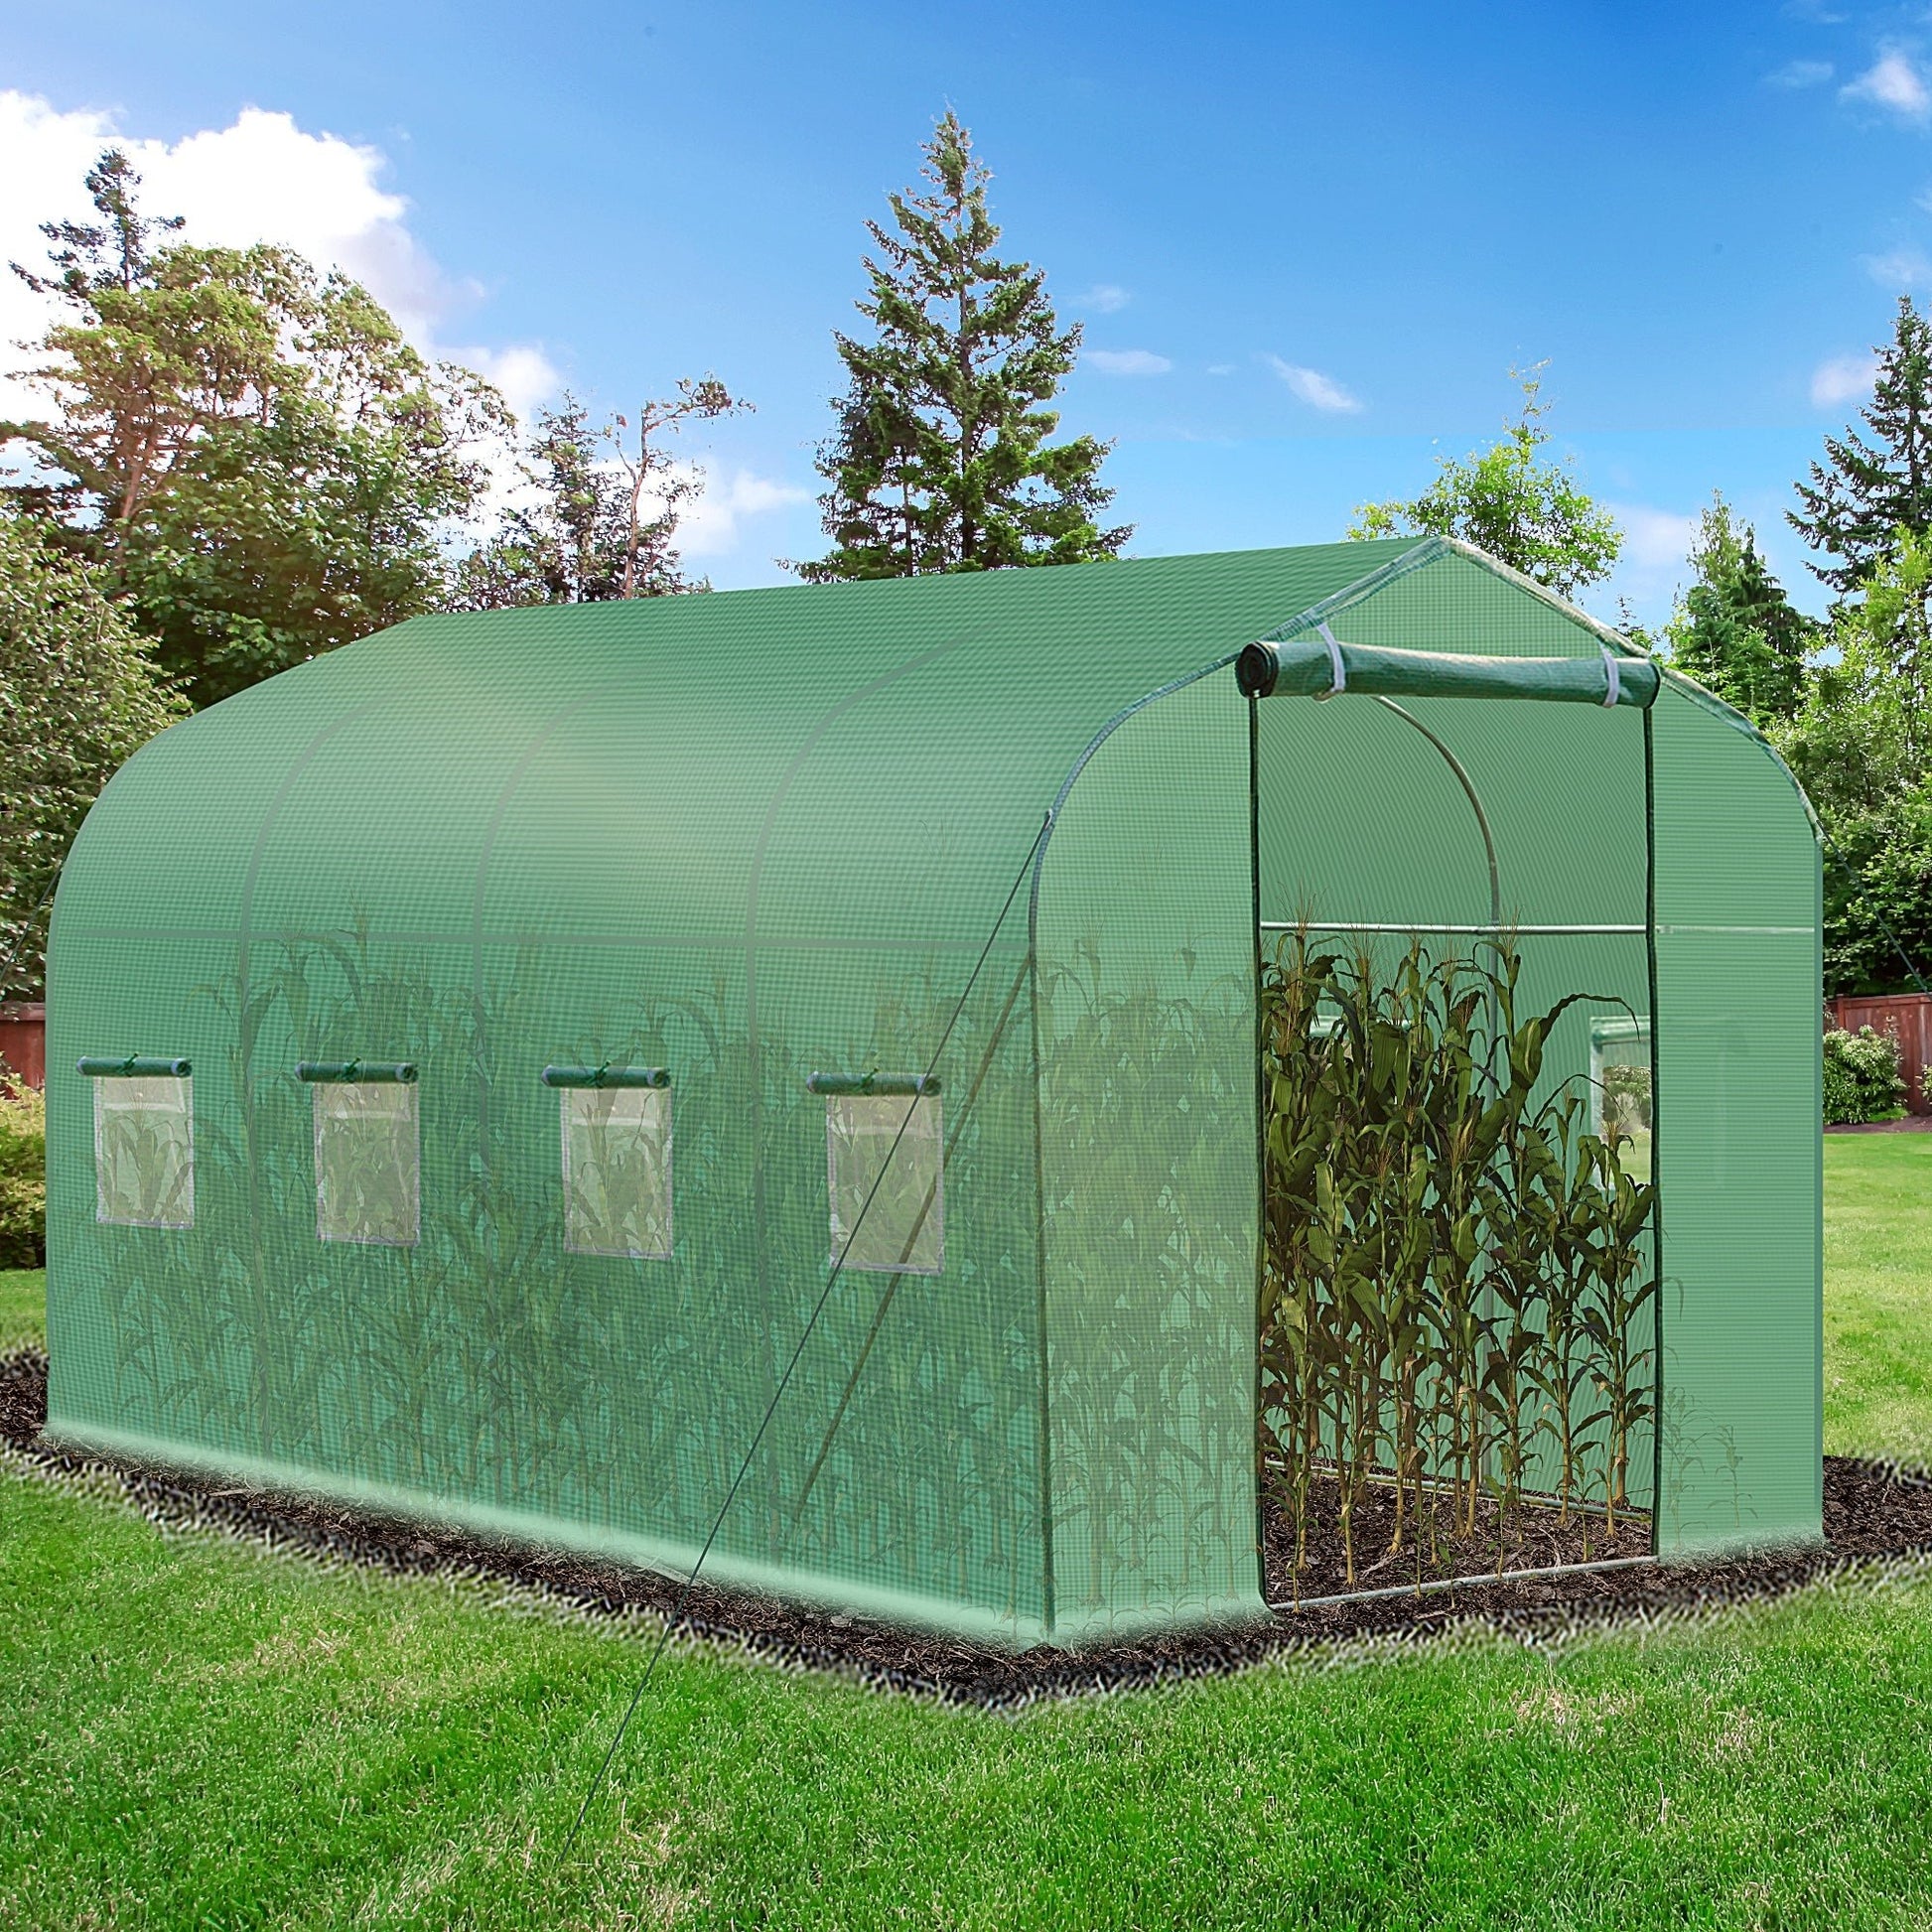 13' x 6.5' x 6.5' Steeple Walk-in Greenhouse Garden Plant Seed Grow Tent Polytennel with Windows and Door Green - Gallery Canada